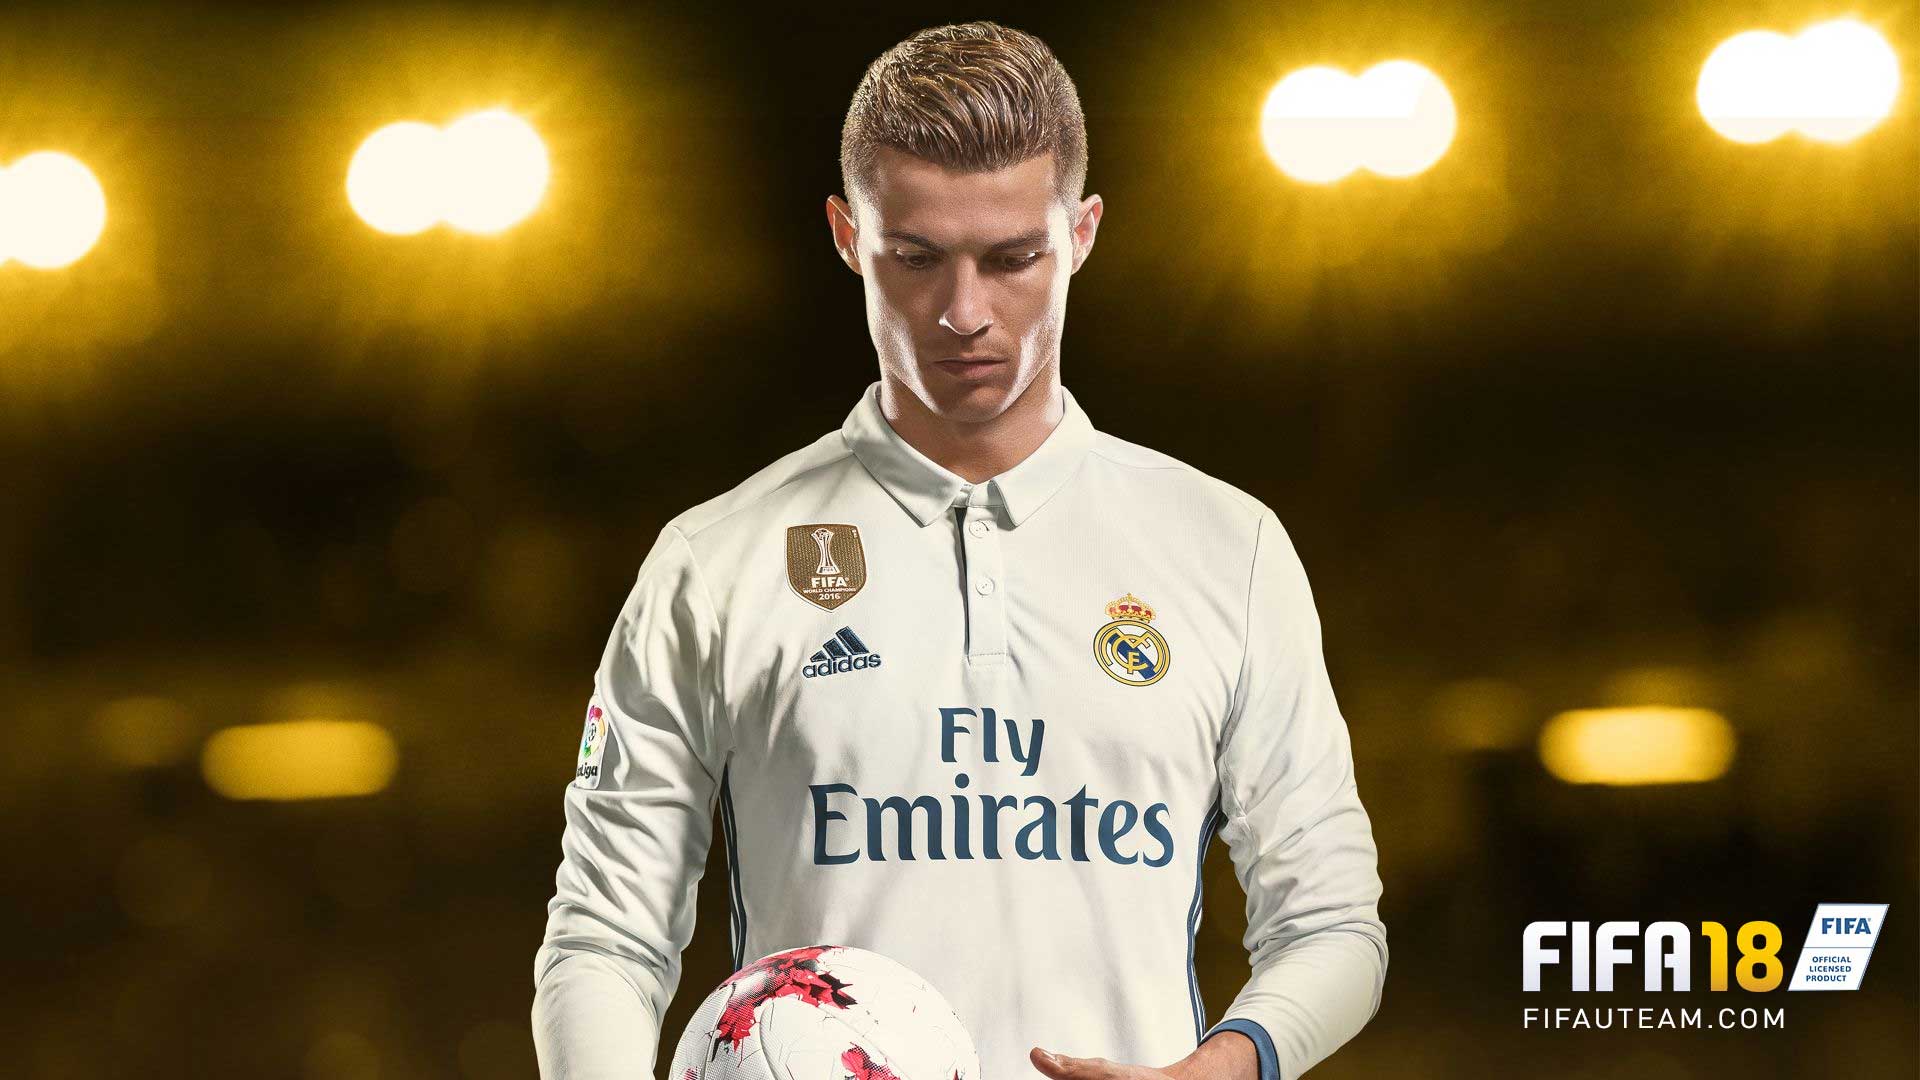 Guide to Buy FIFA 18 - Prices, Stores, Editions, Dates & More